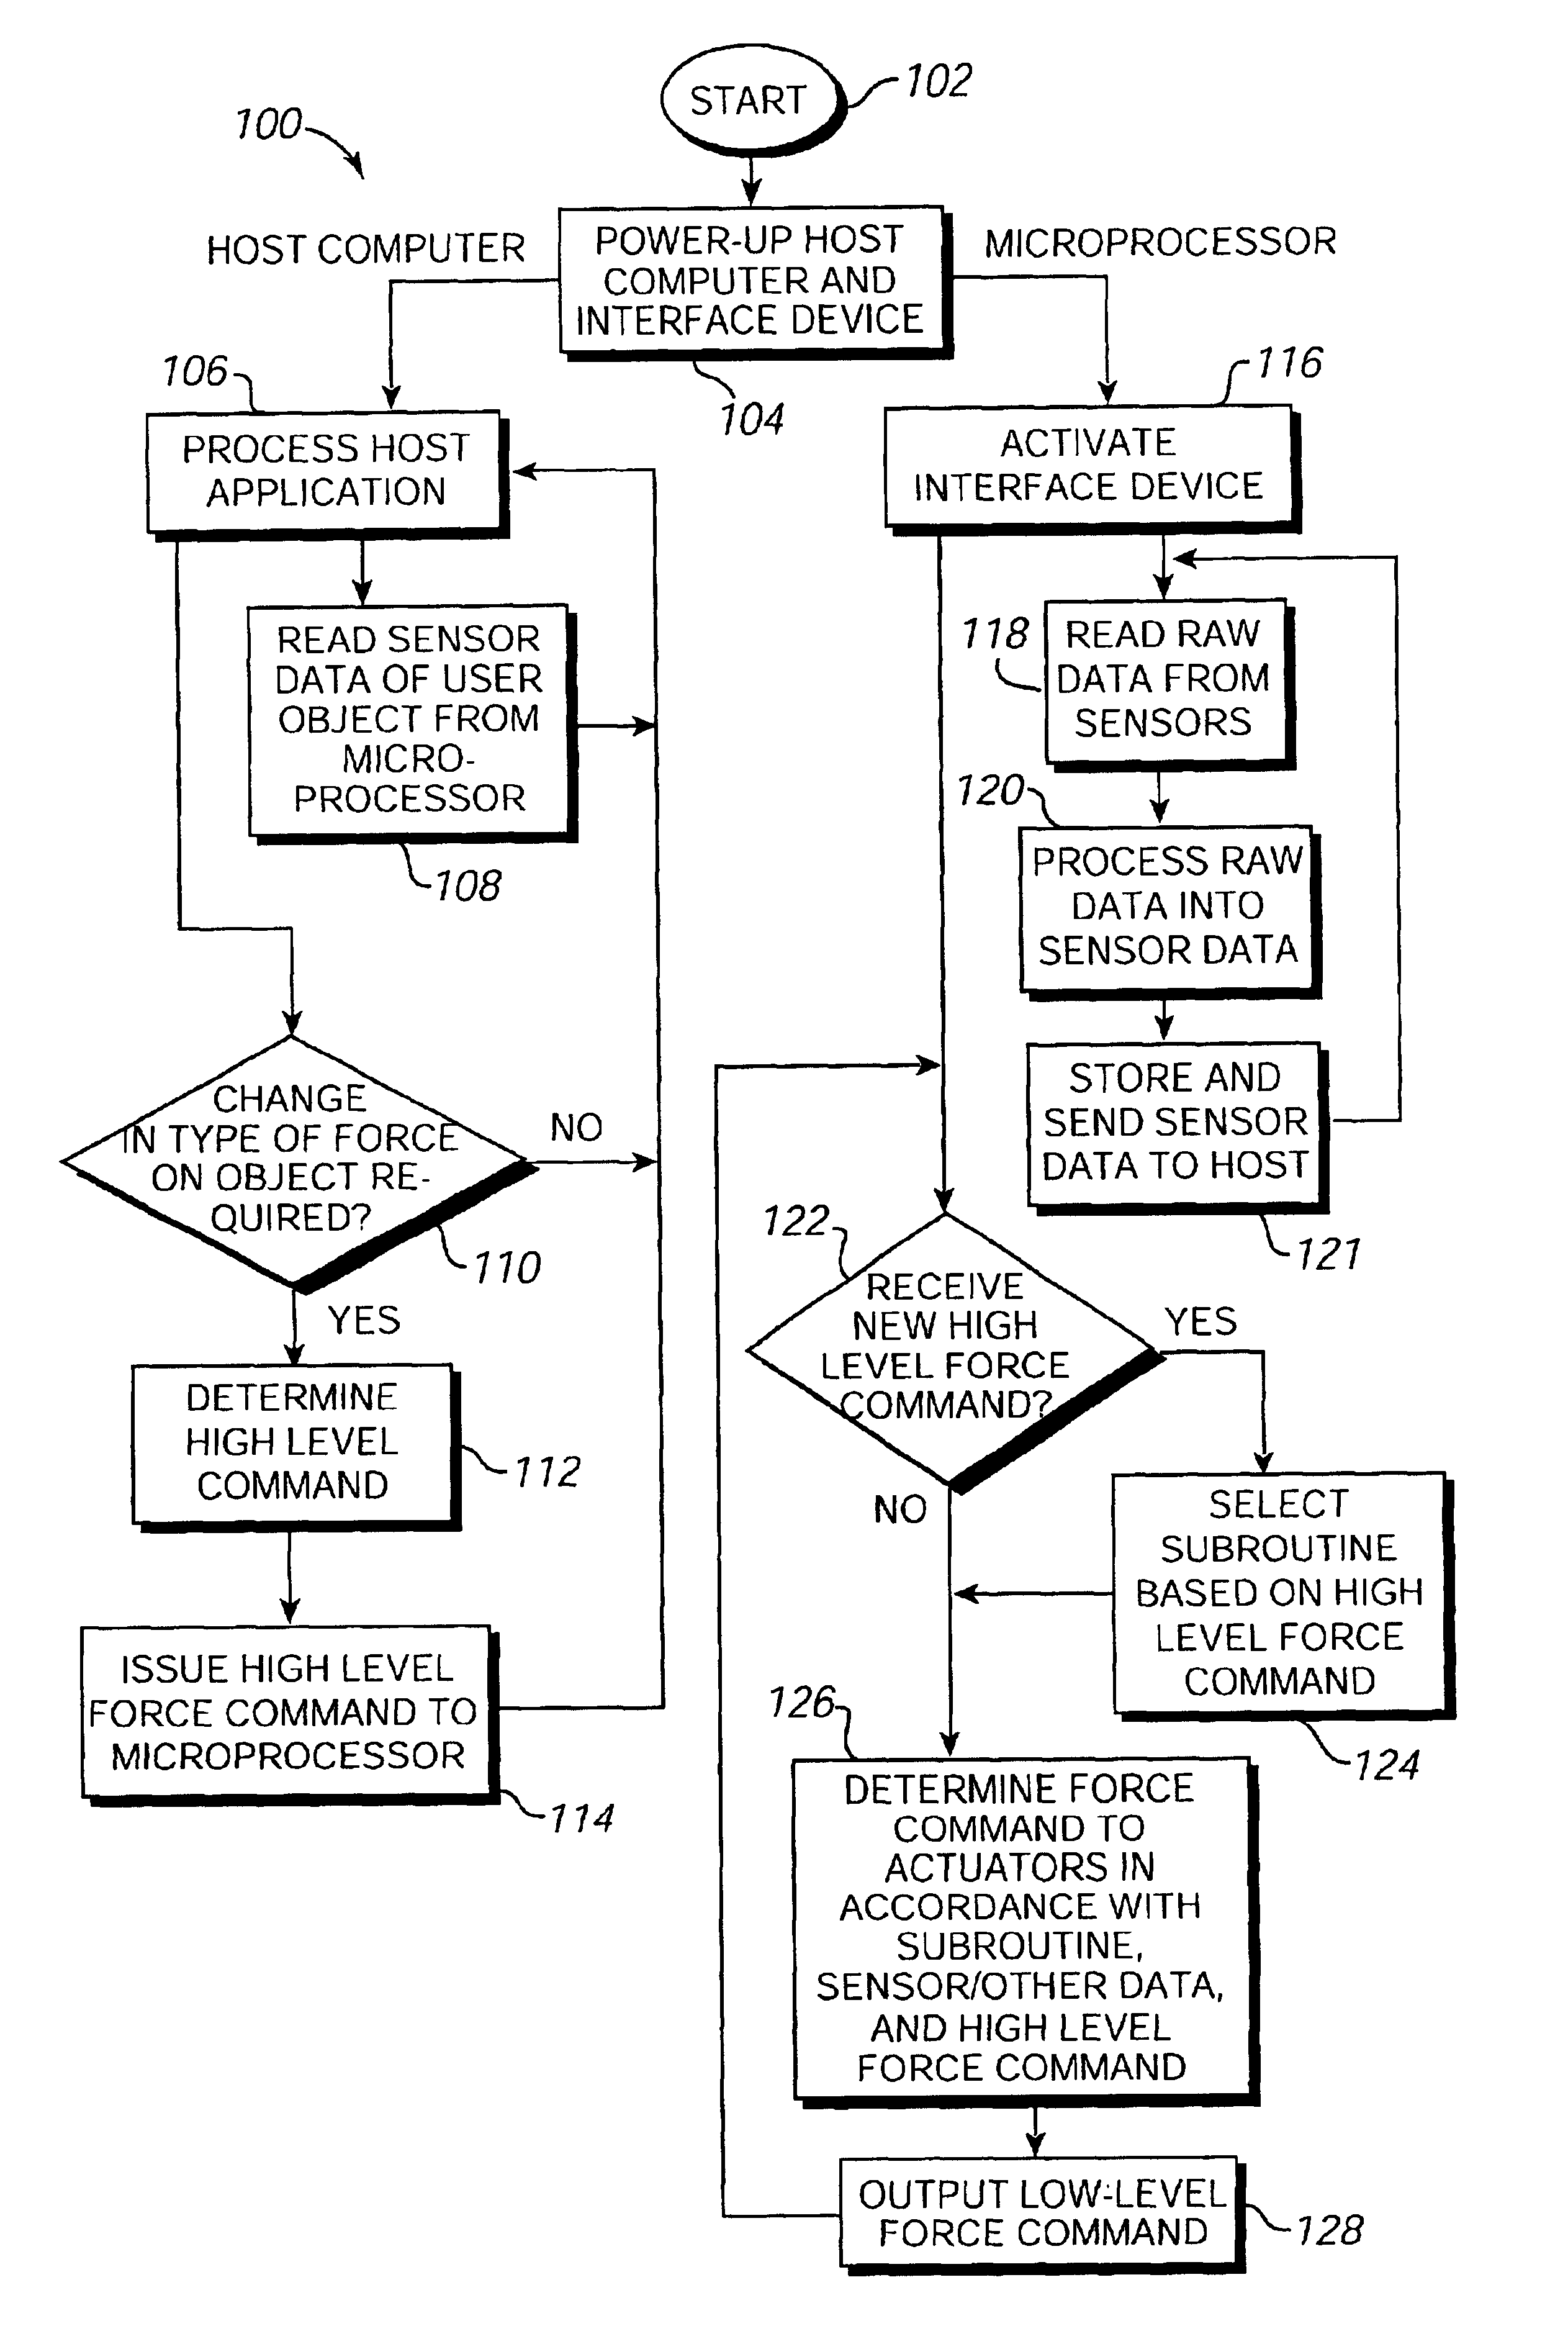 Force feedback device with microprocessor receiving low level commands